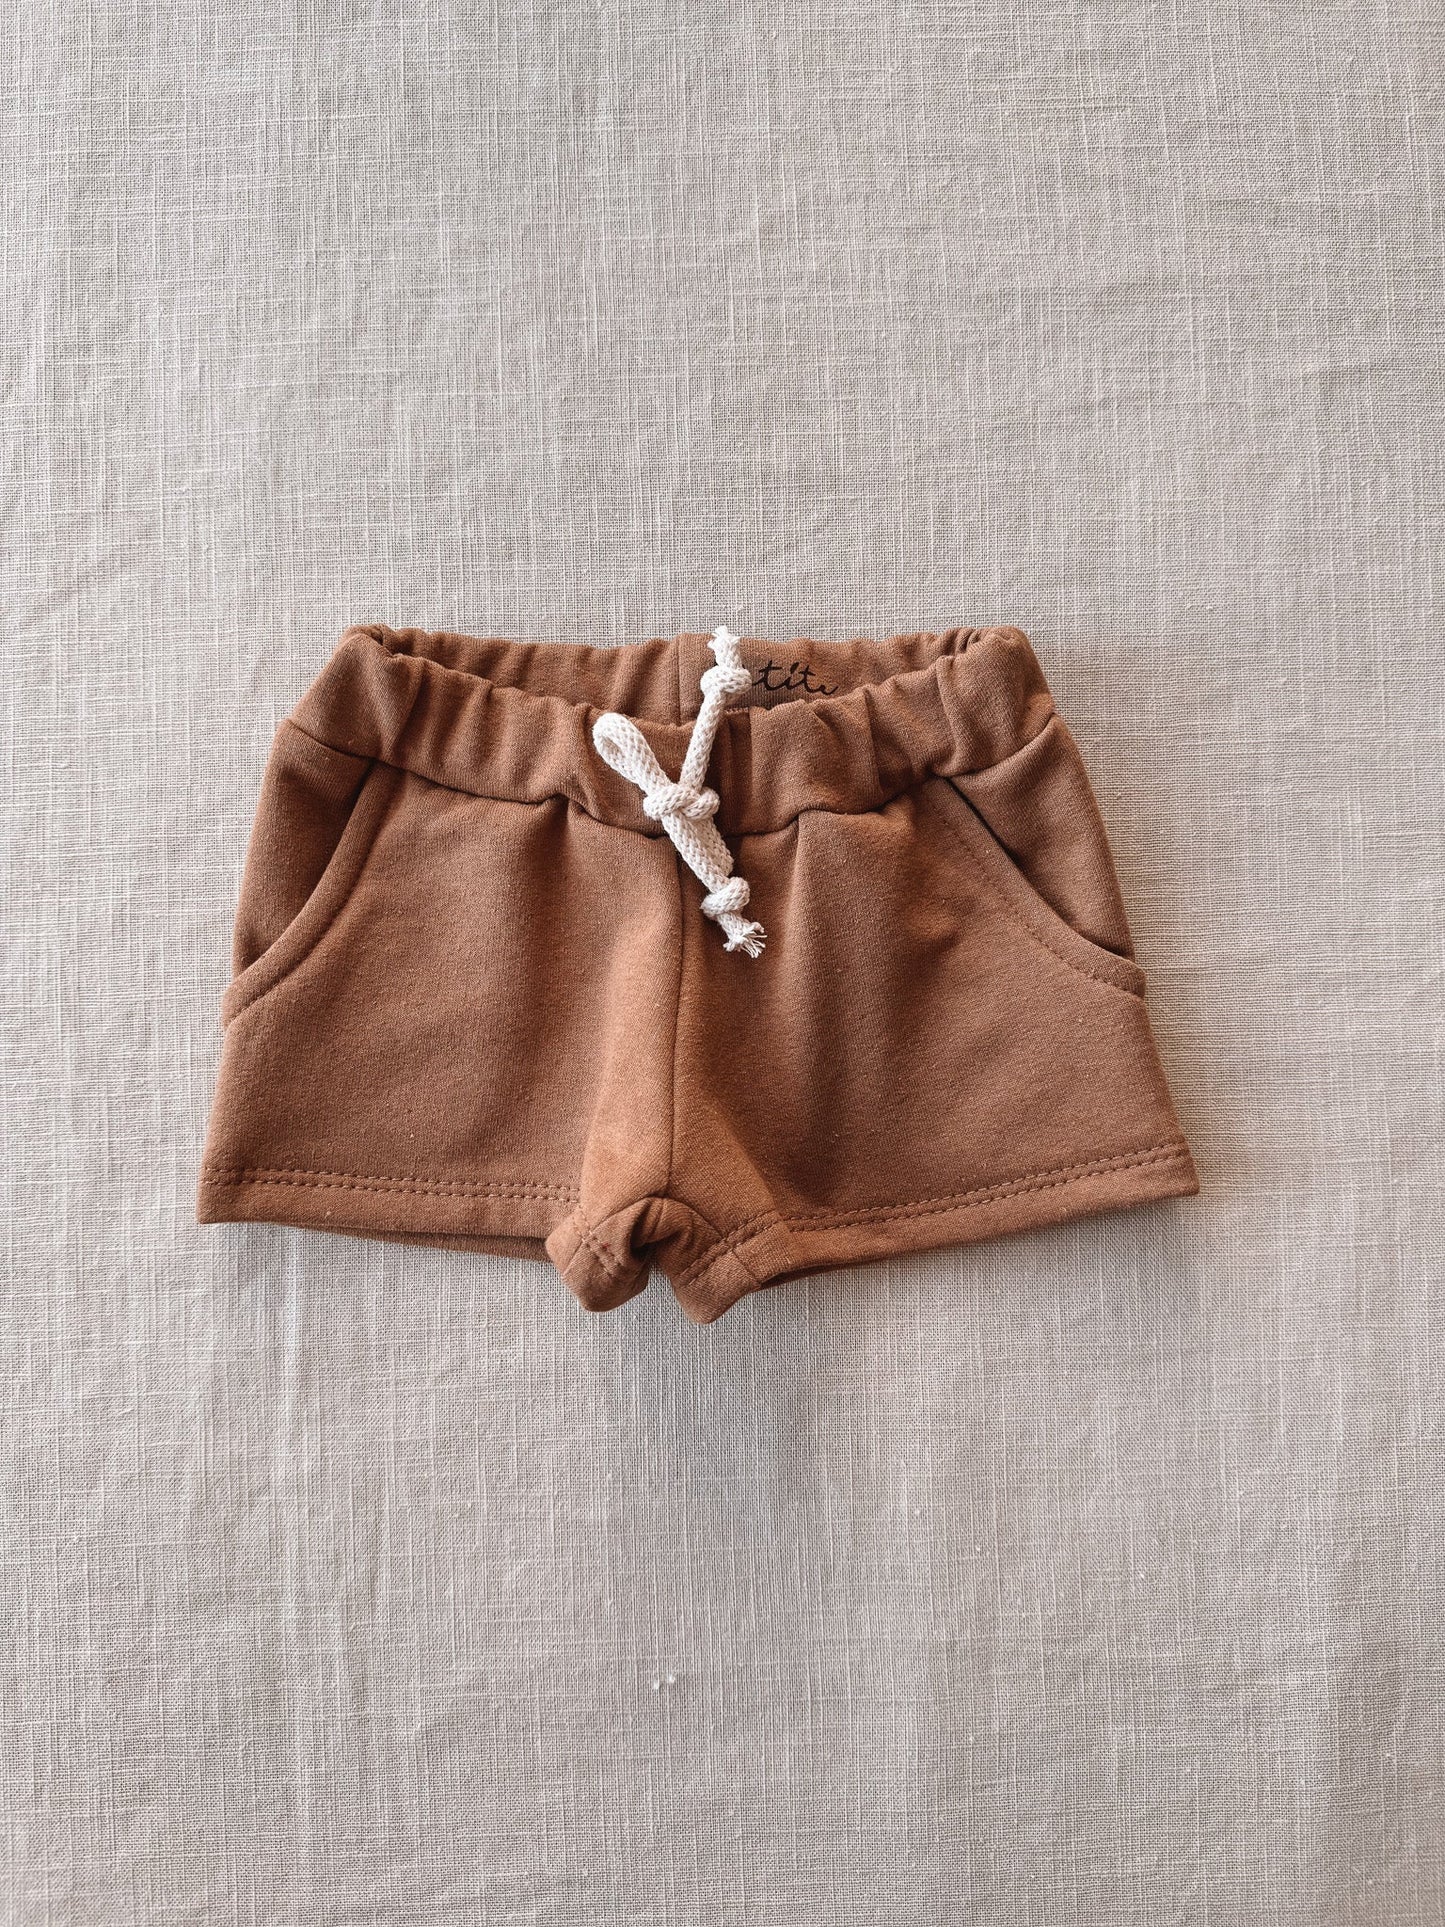 Cotton shorts / recycled